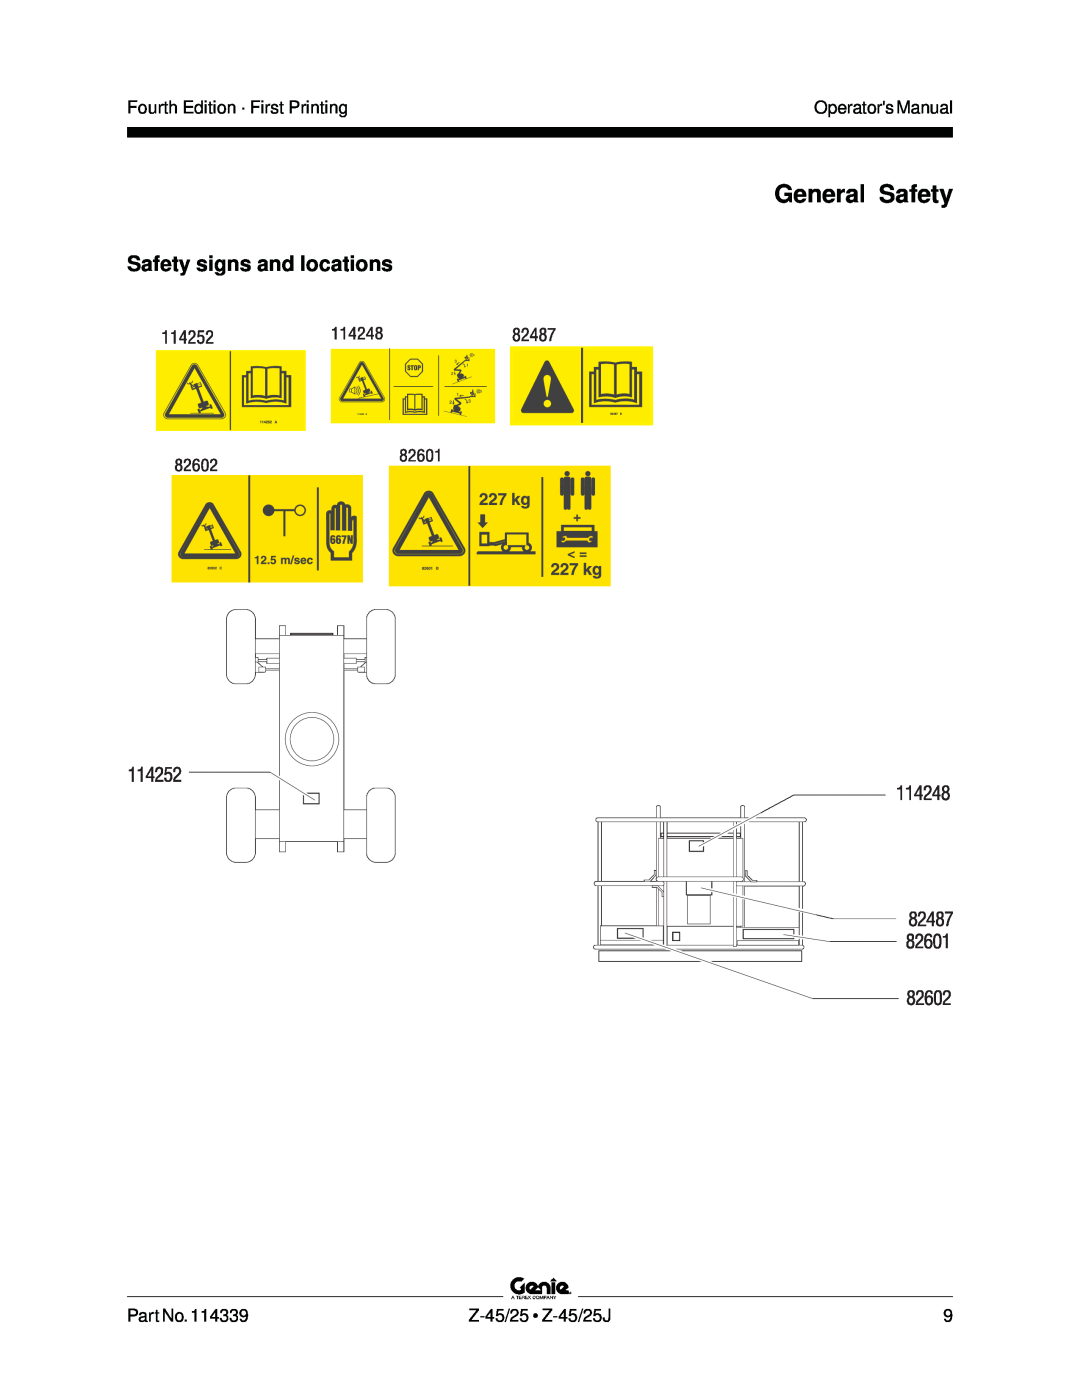 Genie Z-45, Z-25J manual General Safety, Safety signs and locations, Fourth Edition · First Printing, Operators Manual 